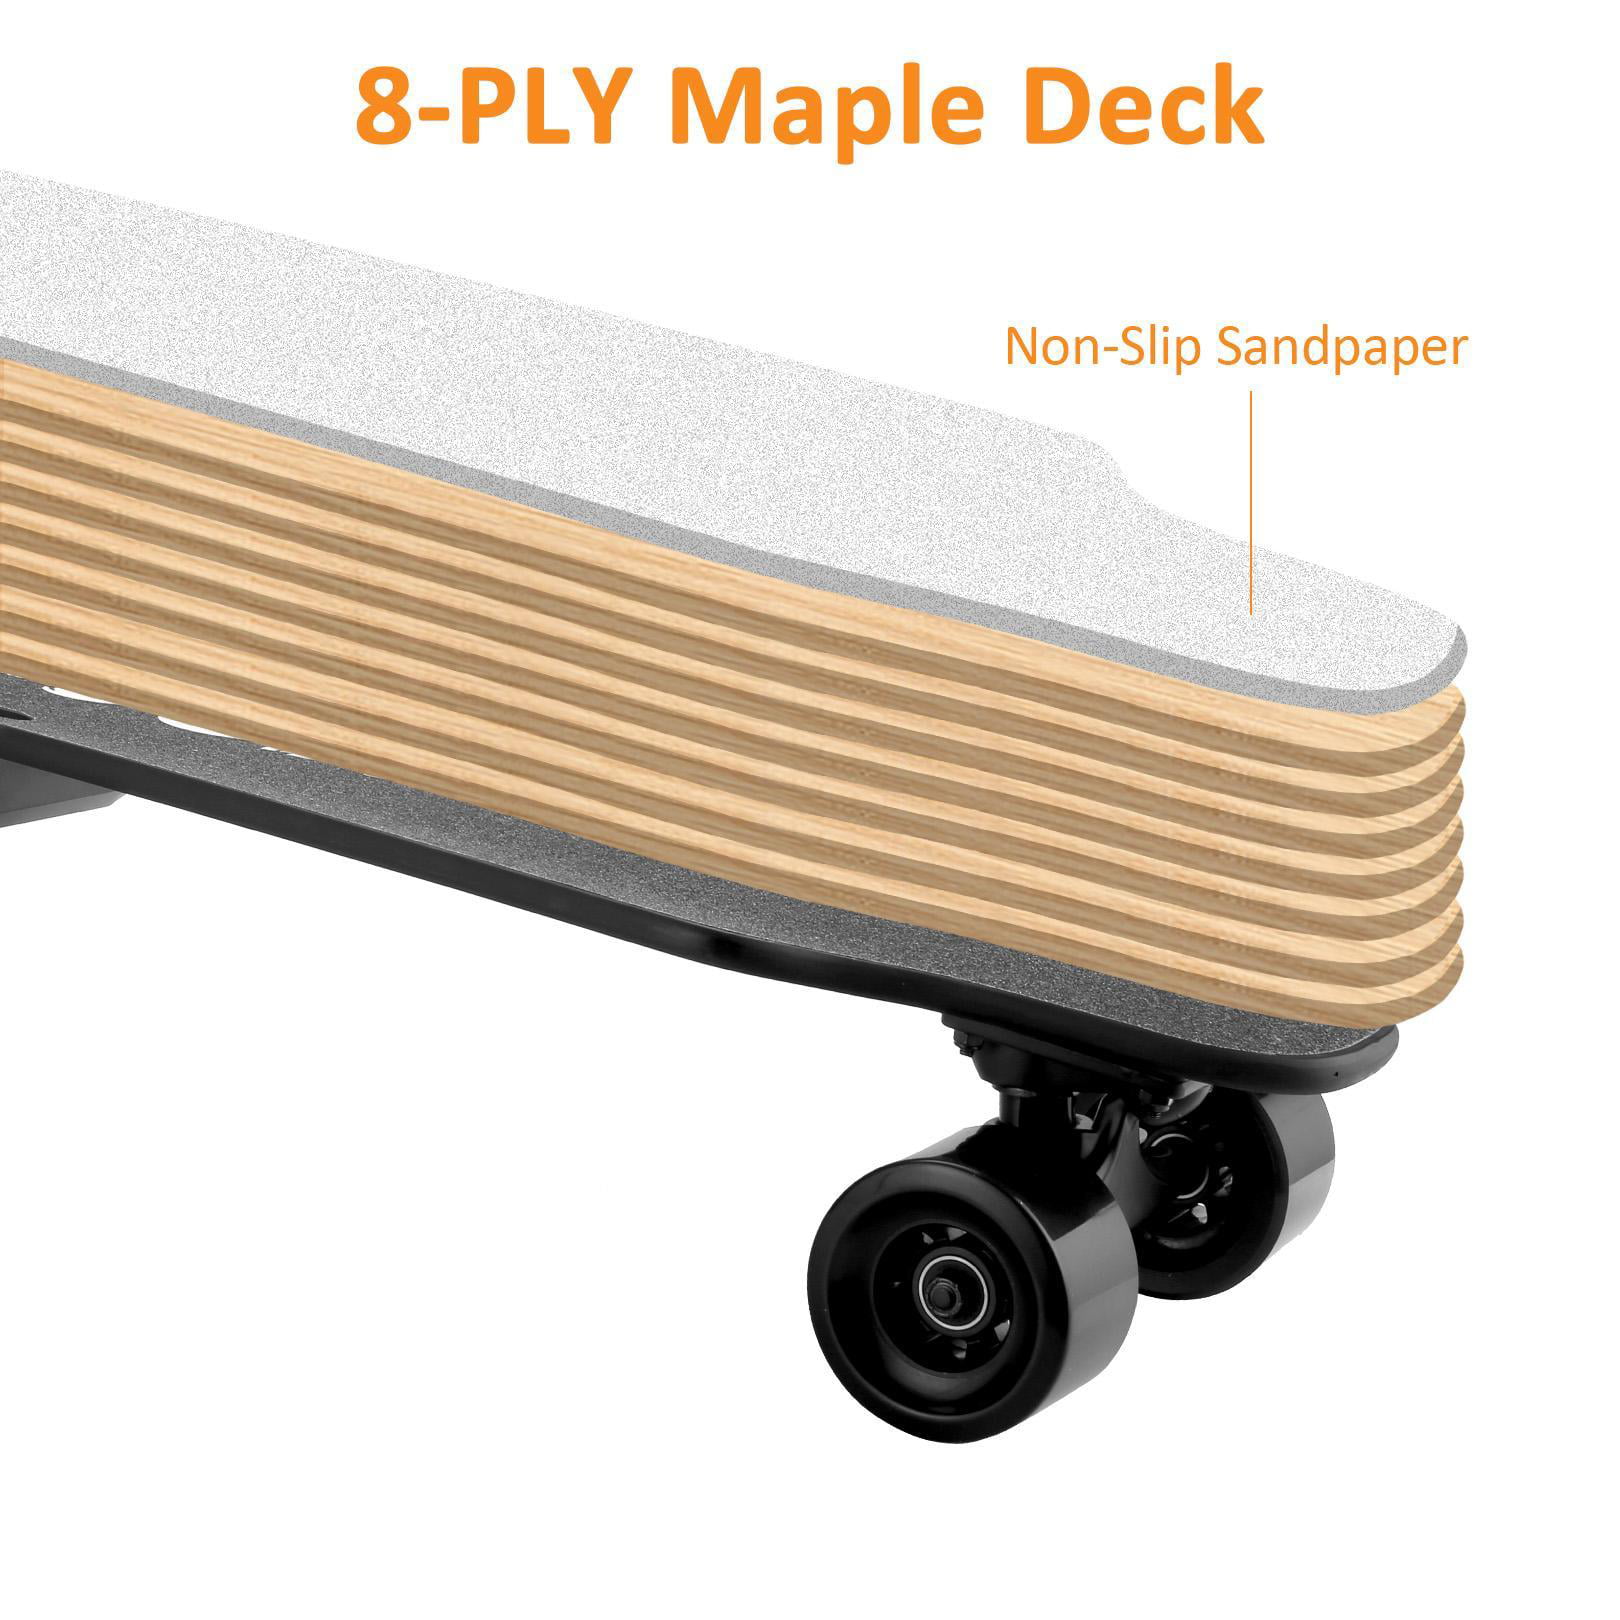 Details about  / Caroma 350W Dual Motor Electric Skateboard Wireless Remote Control Maple Deck